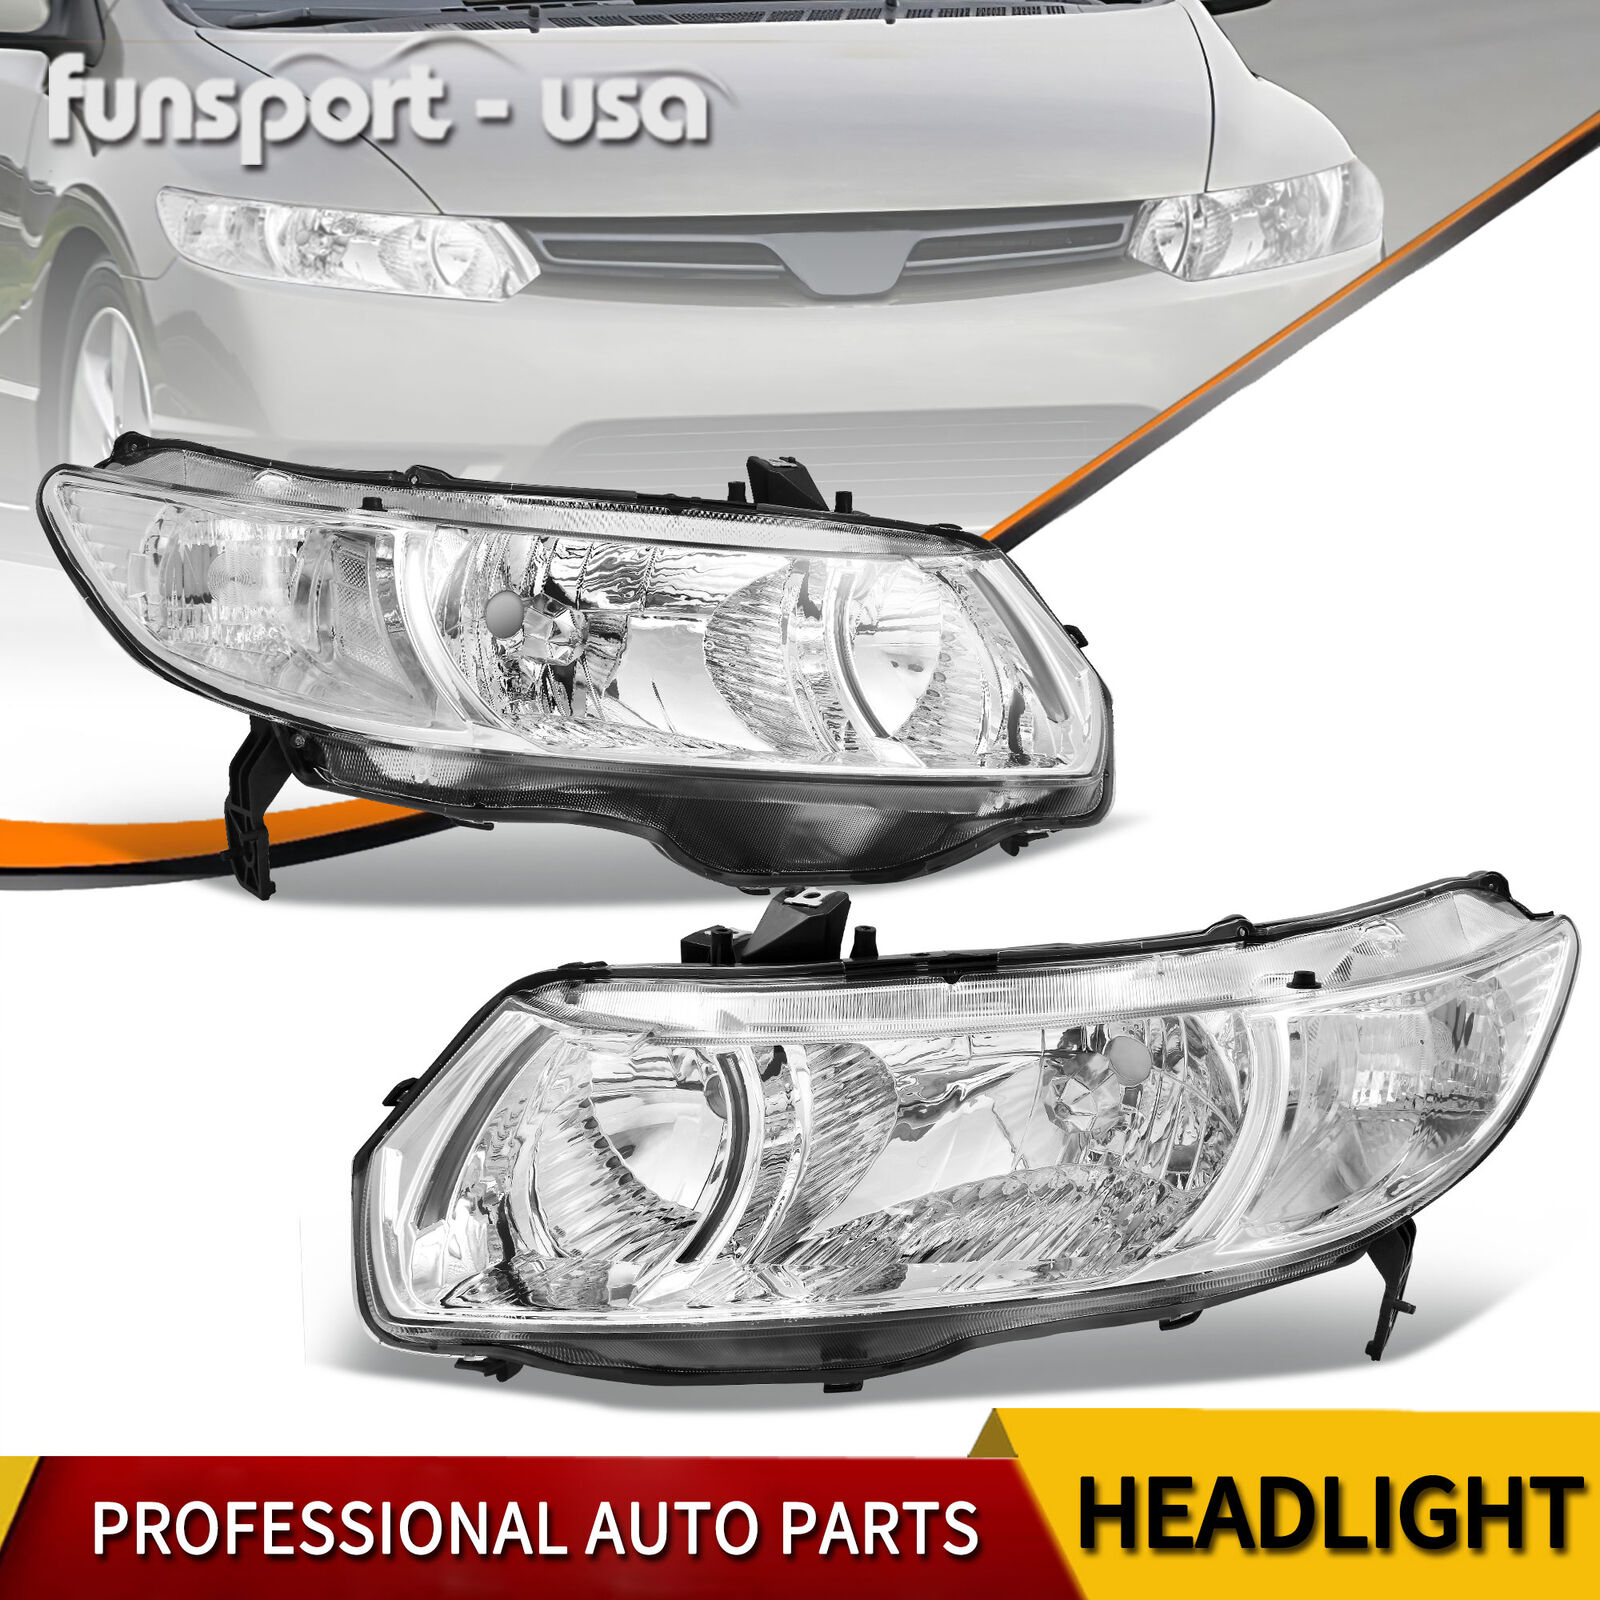 Headlights Assembly Chrome Housing For 2006-2011 Honda Civic Coupe 2-Door Pair